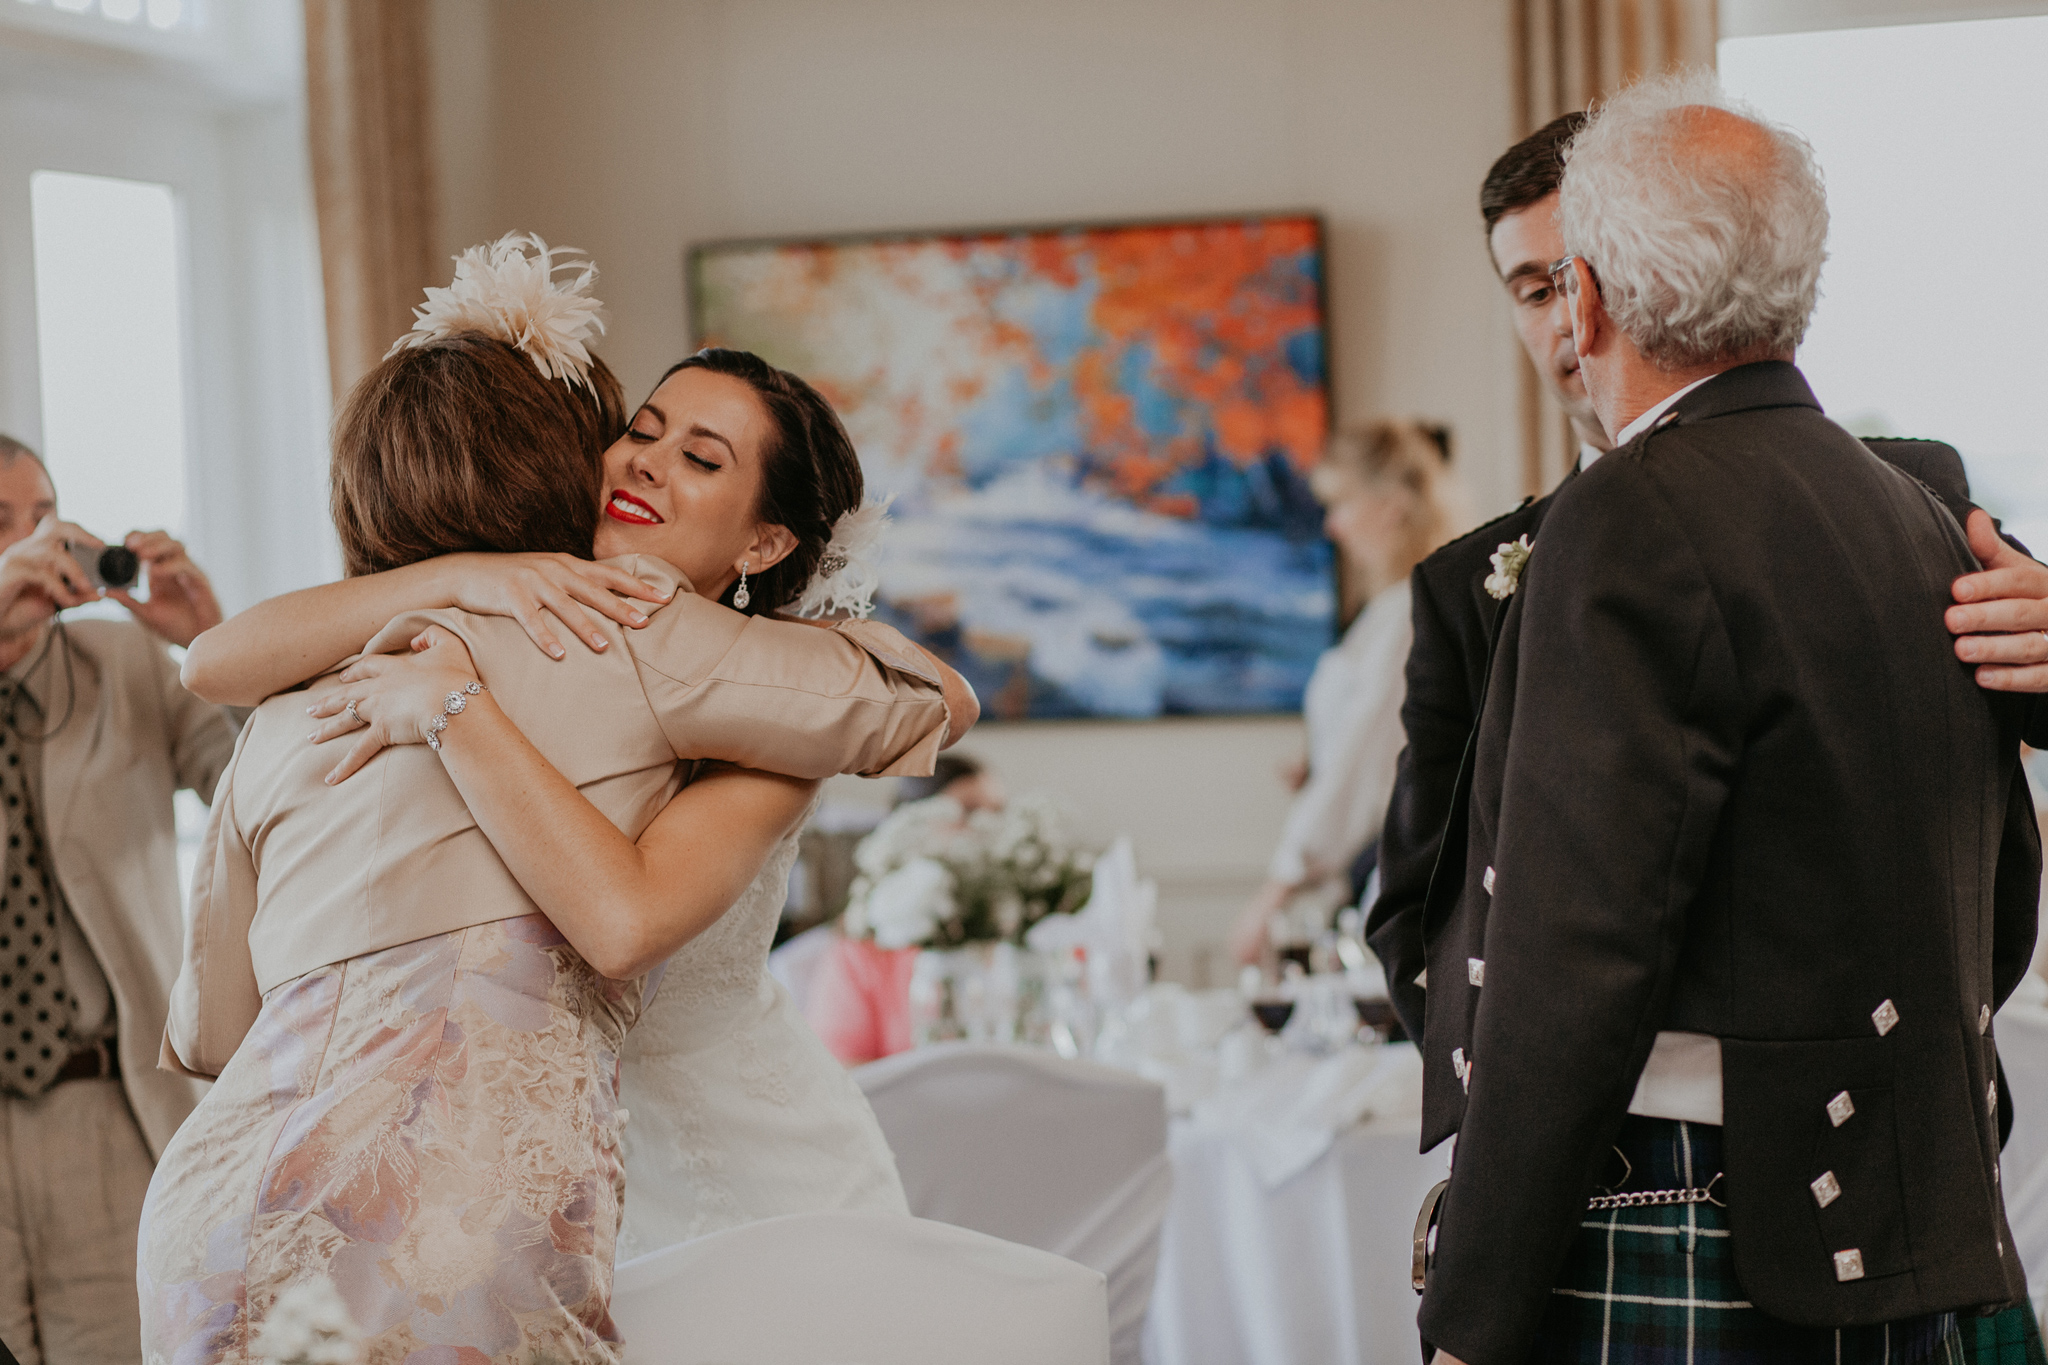 Couple embraces parents after speeches at wedding reception